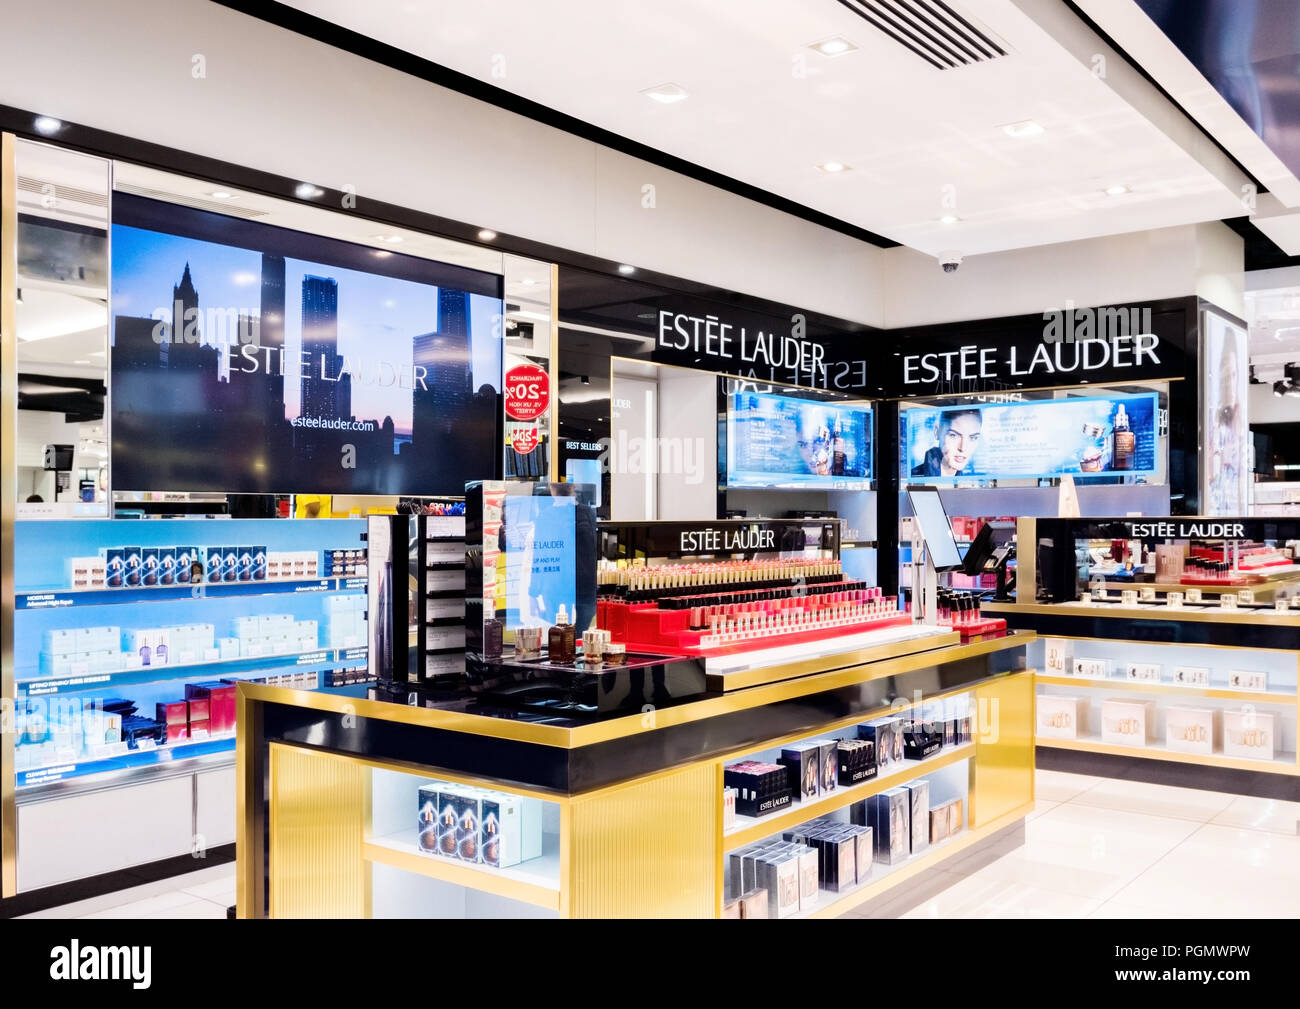 Estee Lauder Store High Resolution Stock Photography and Images - Alamy